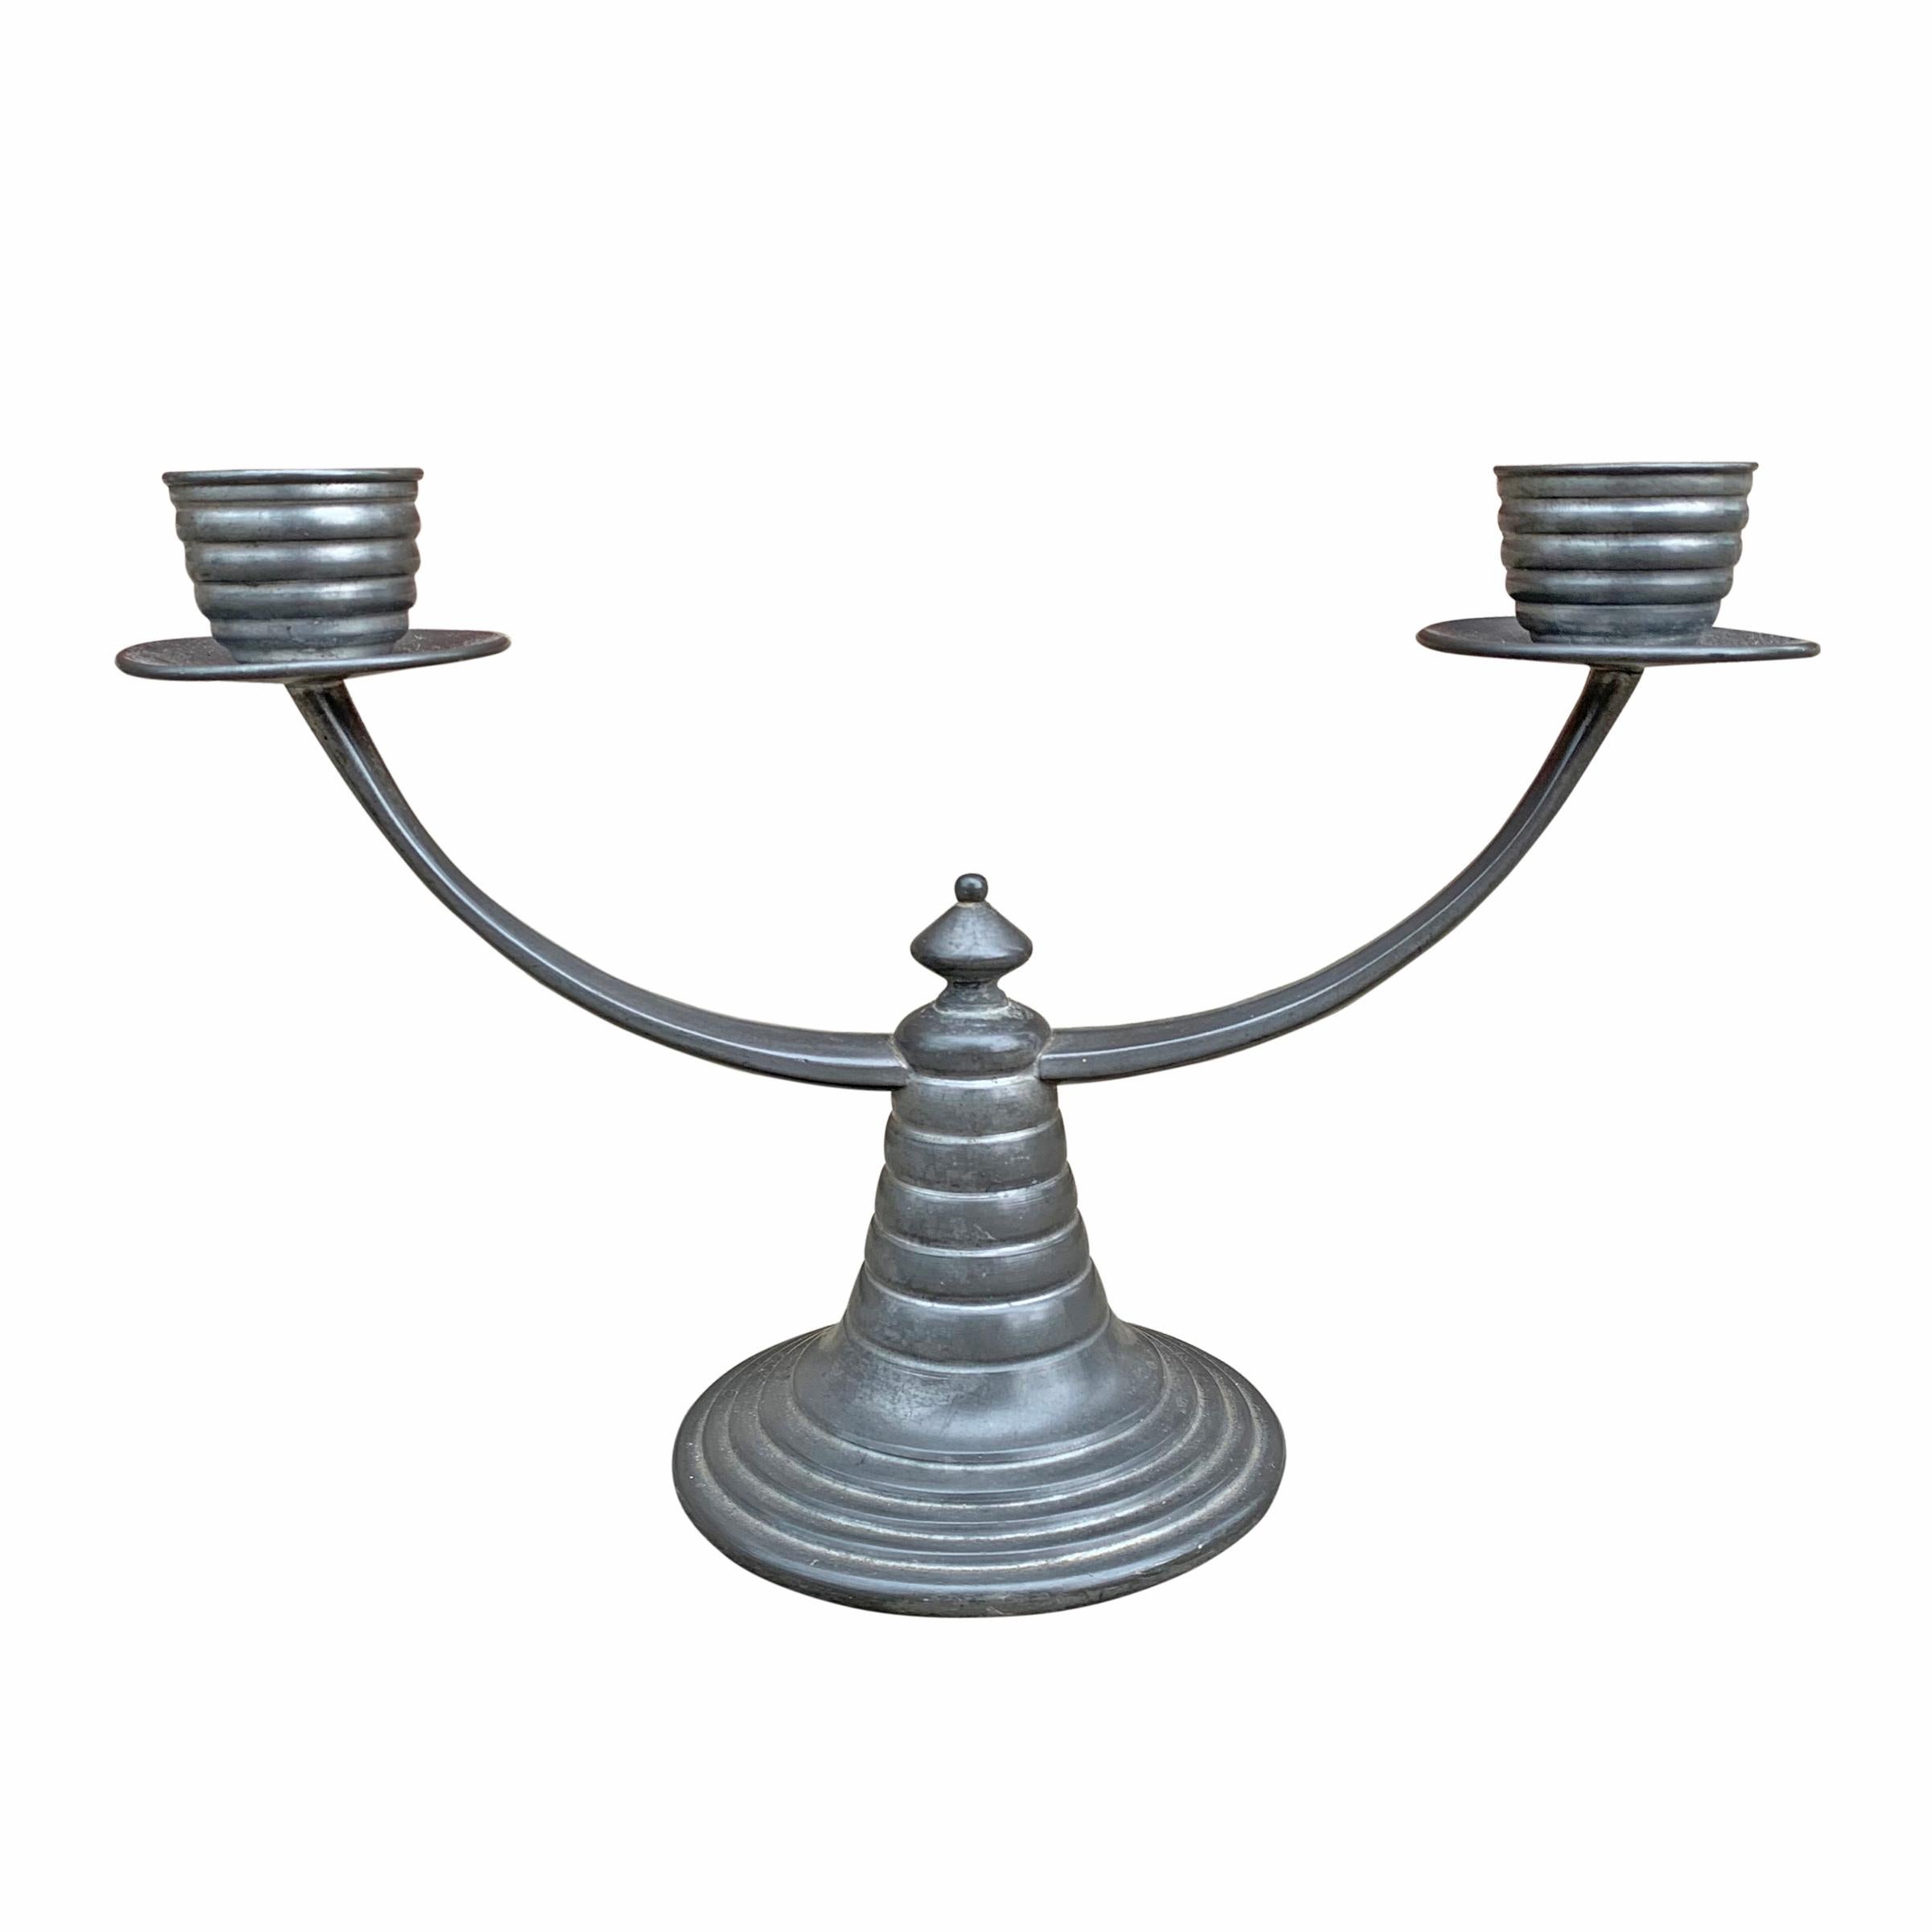 A fantastic pair of early 20th century American Art Deco pewter two-arm candelabra with a fun ribbed motif.